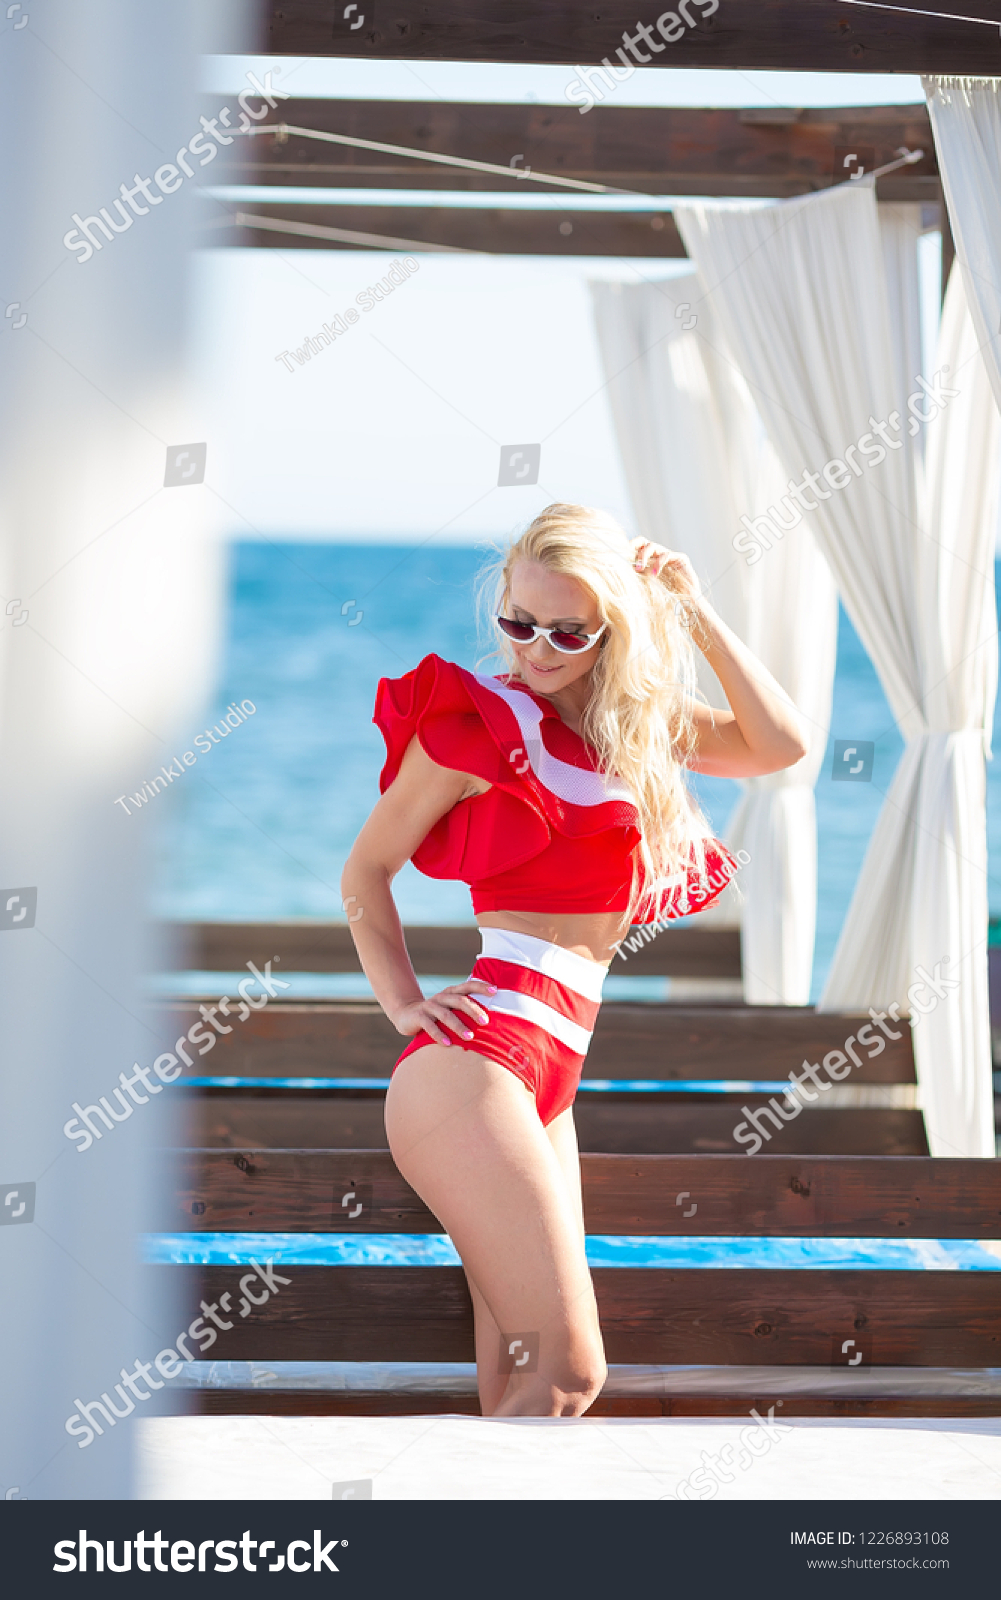 Sexy bikini body woman sun tanning relaxing on perfect tropical beach and turquoise ocean water. Sensual Seducing lady model walking in fashion red swimwear with smooth tanned skin and long lean legs #1226893108